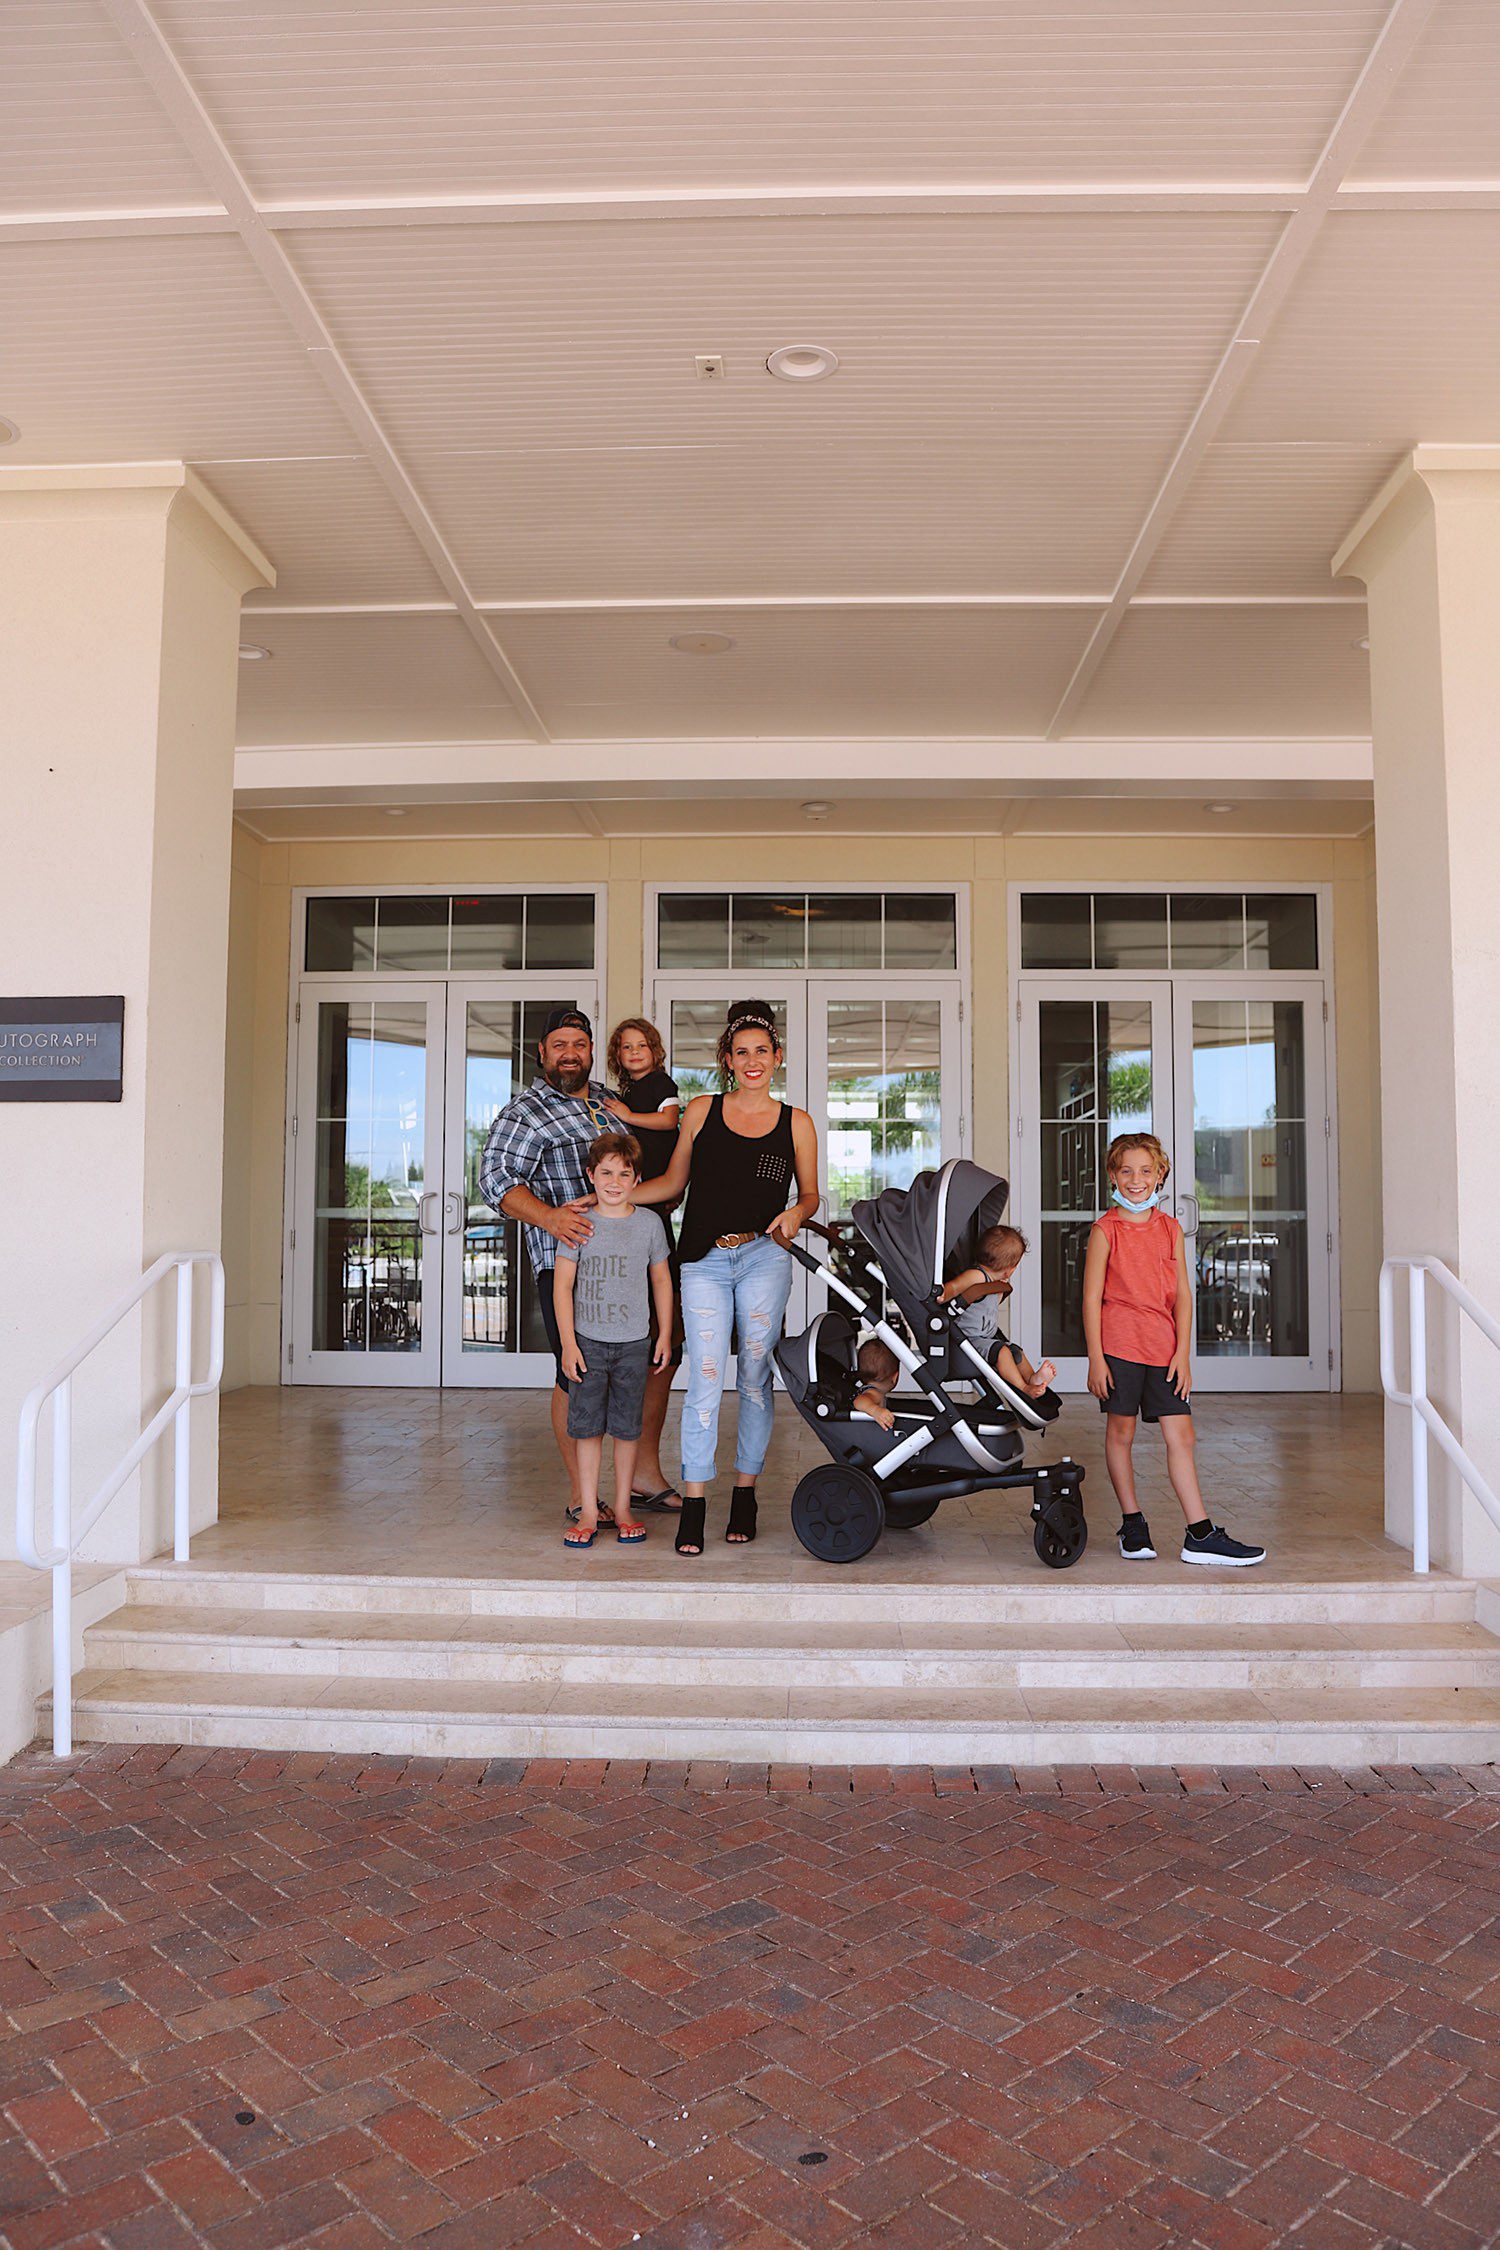 Florida Vacations Worth Staying for: Anna Maria Island Staycation. Where to stay and what to do on Anna Maria Island, Florida for a Florida family vacation by travel and lifestyle blogger Tabitha Blue of Fresh Mommy Blog. 